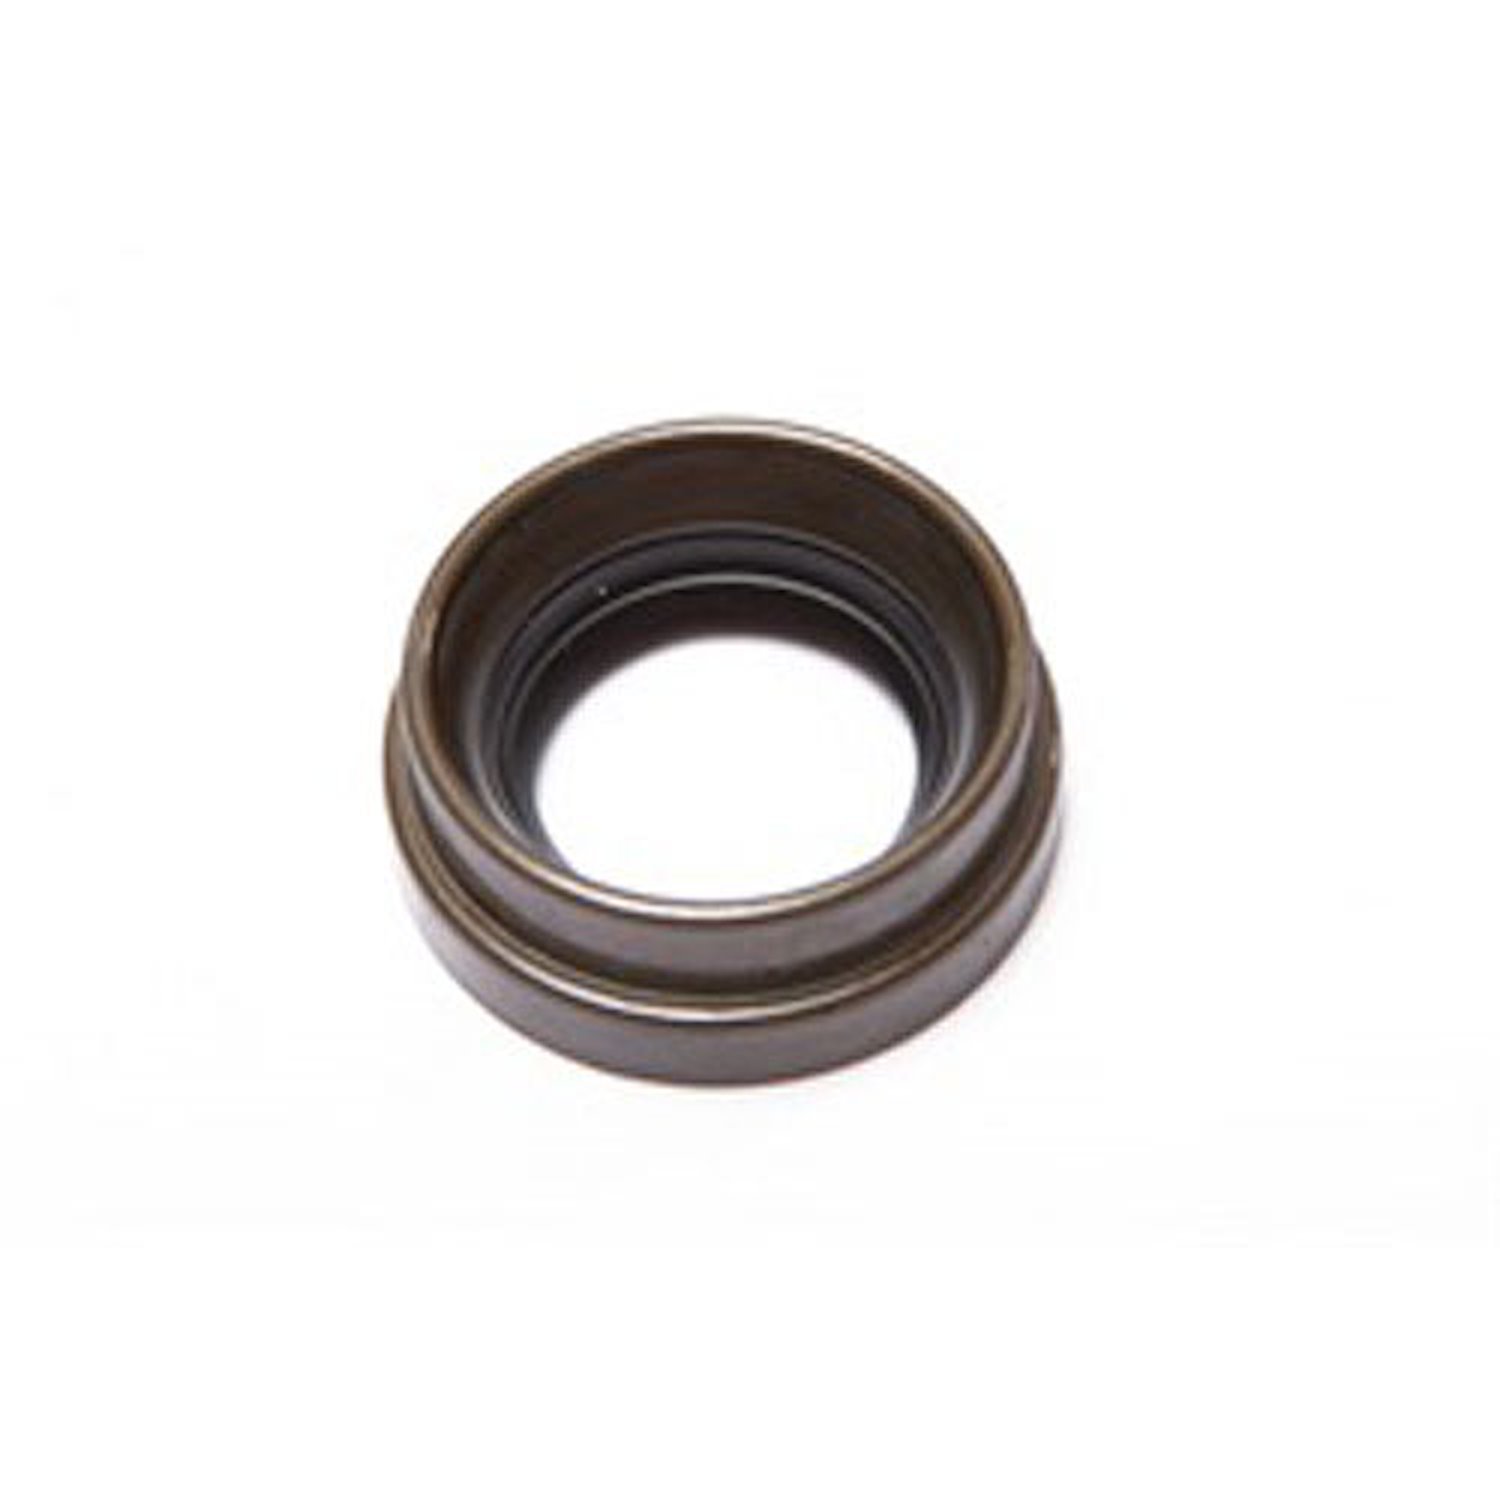 This inner axle oil seal from Omix-ADA fits 72-86 Jeep CJ models 84-01 Cherokees and 87-12 Wranglers with Dana 30 front axle.